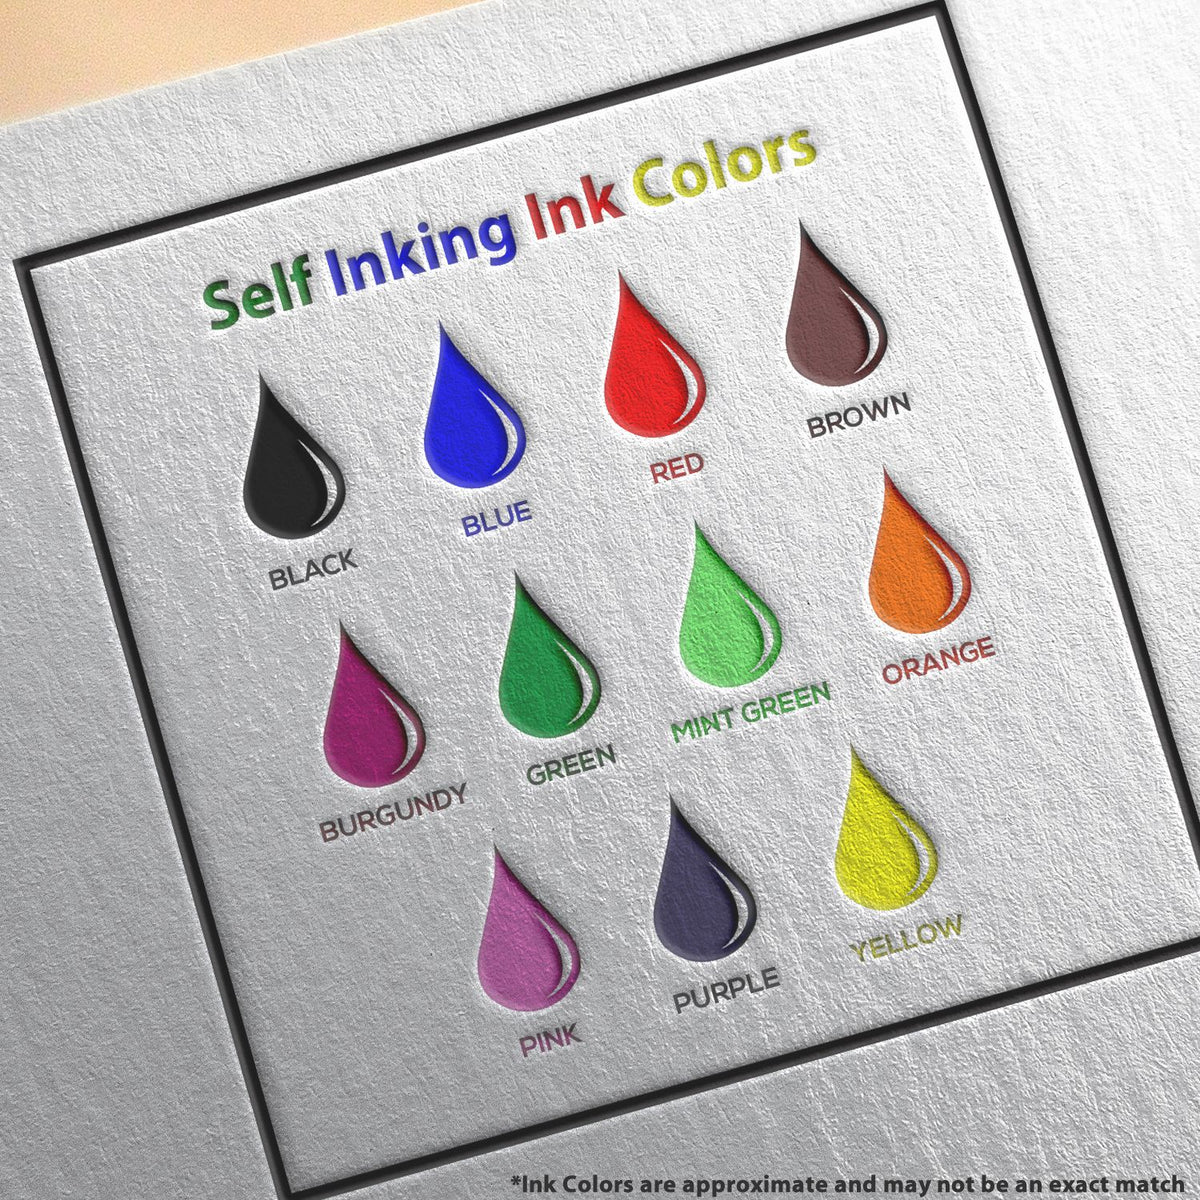 A picture showing the different ink colors or hues available for the Self-Inking Rectangular Oregon Notary Stamp product.